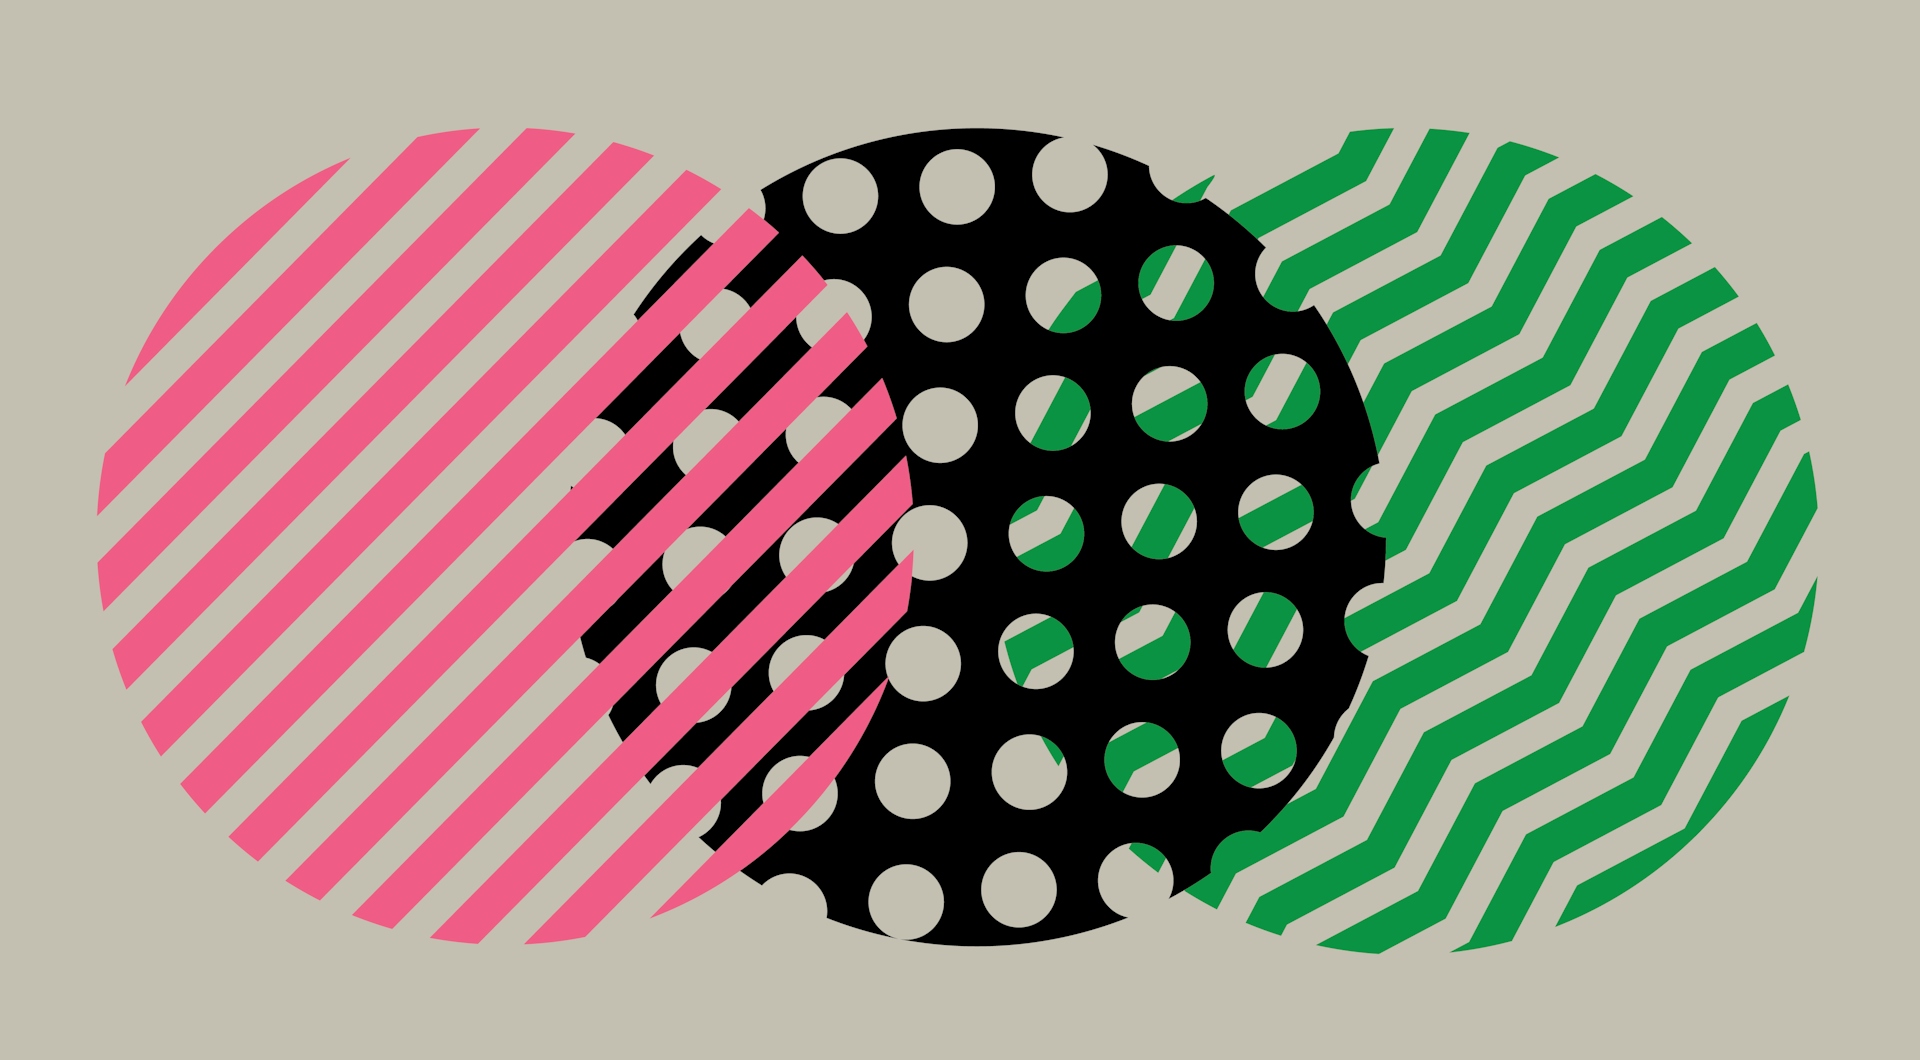 Pink, black, and green circles on a light background